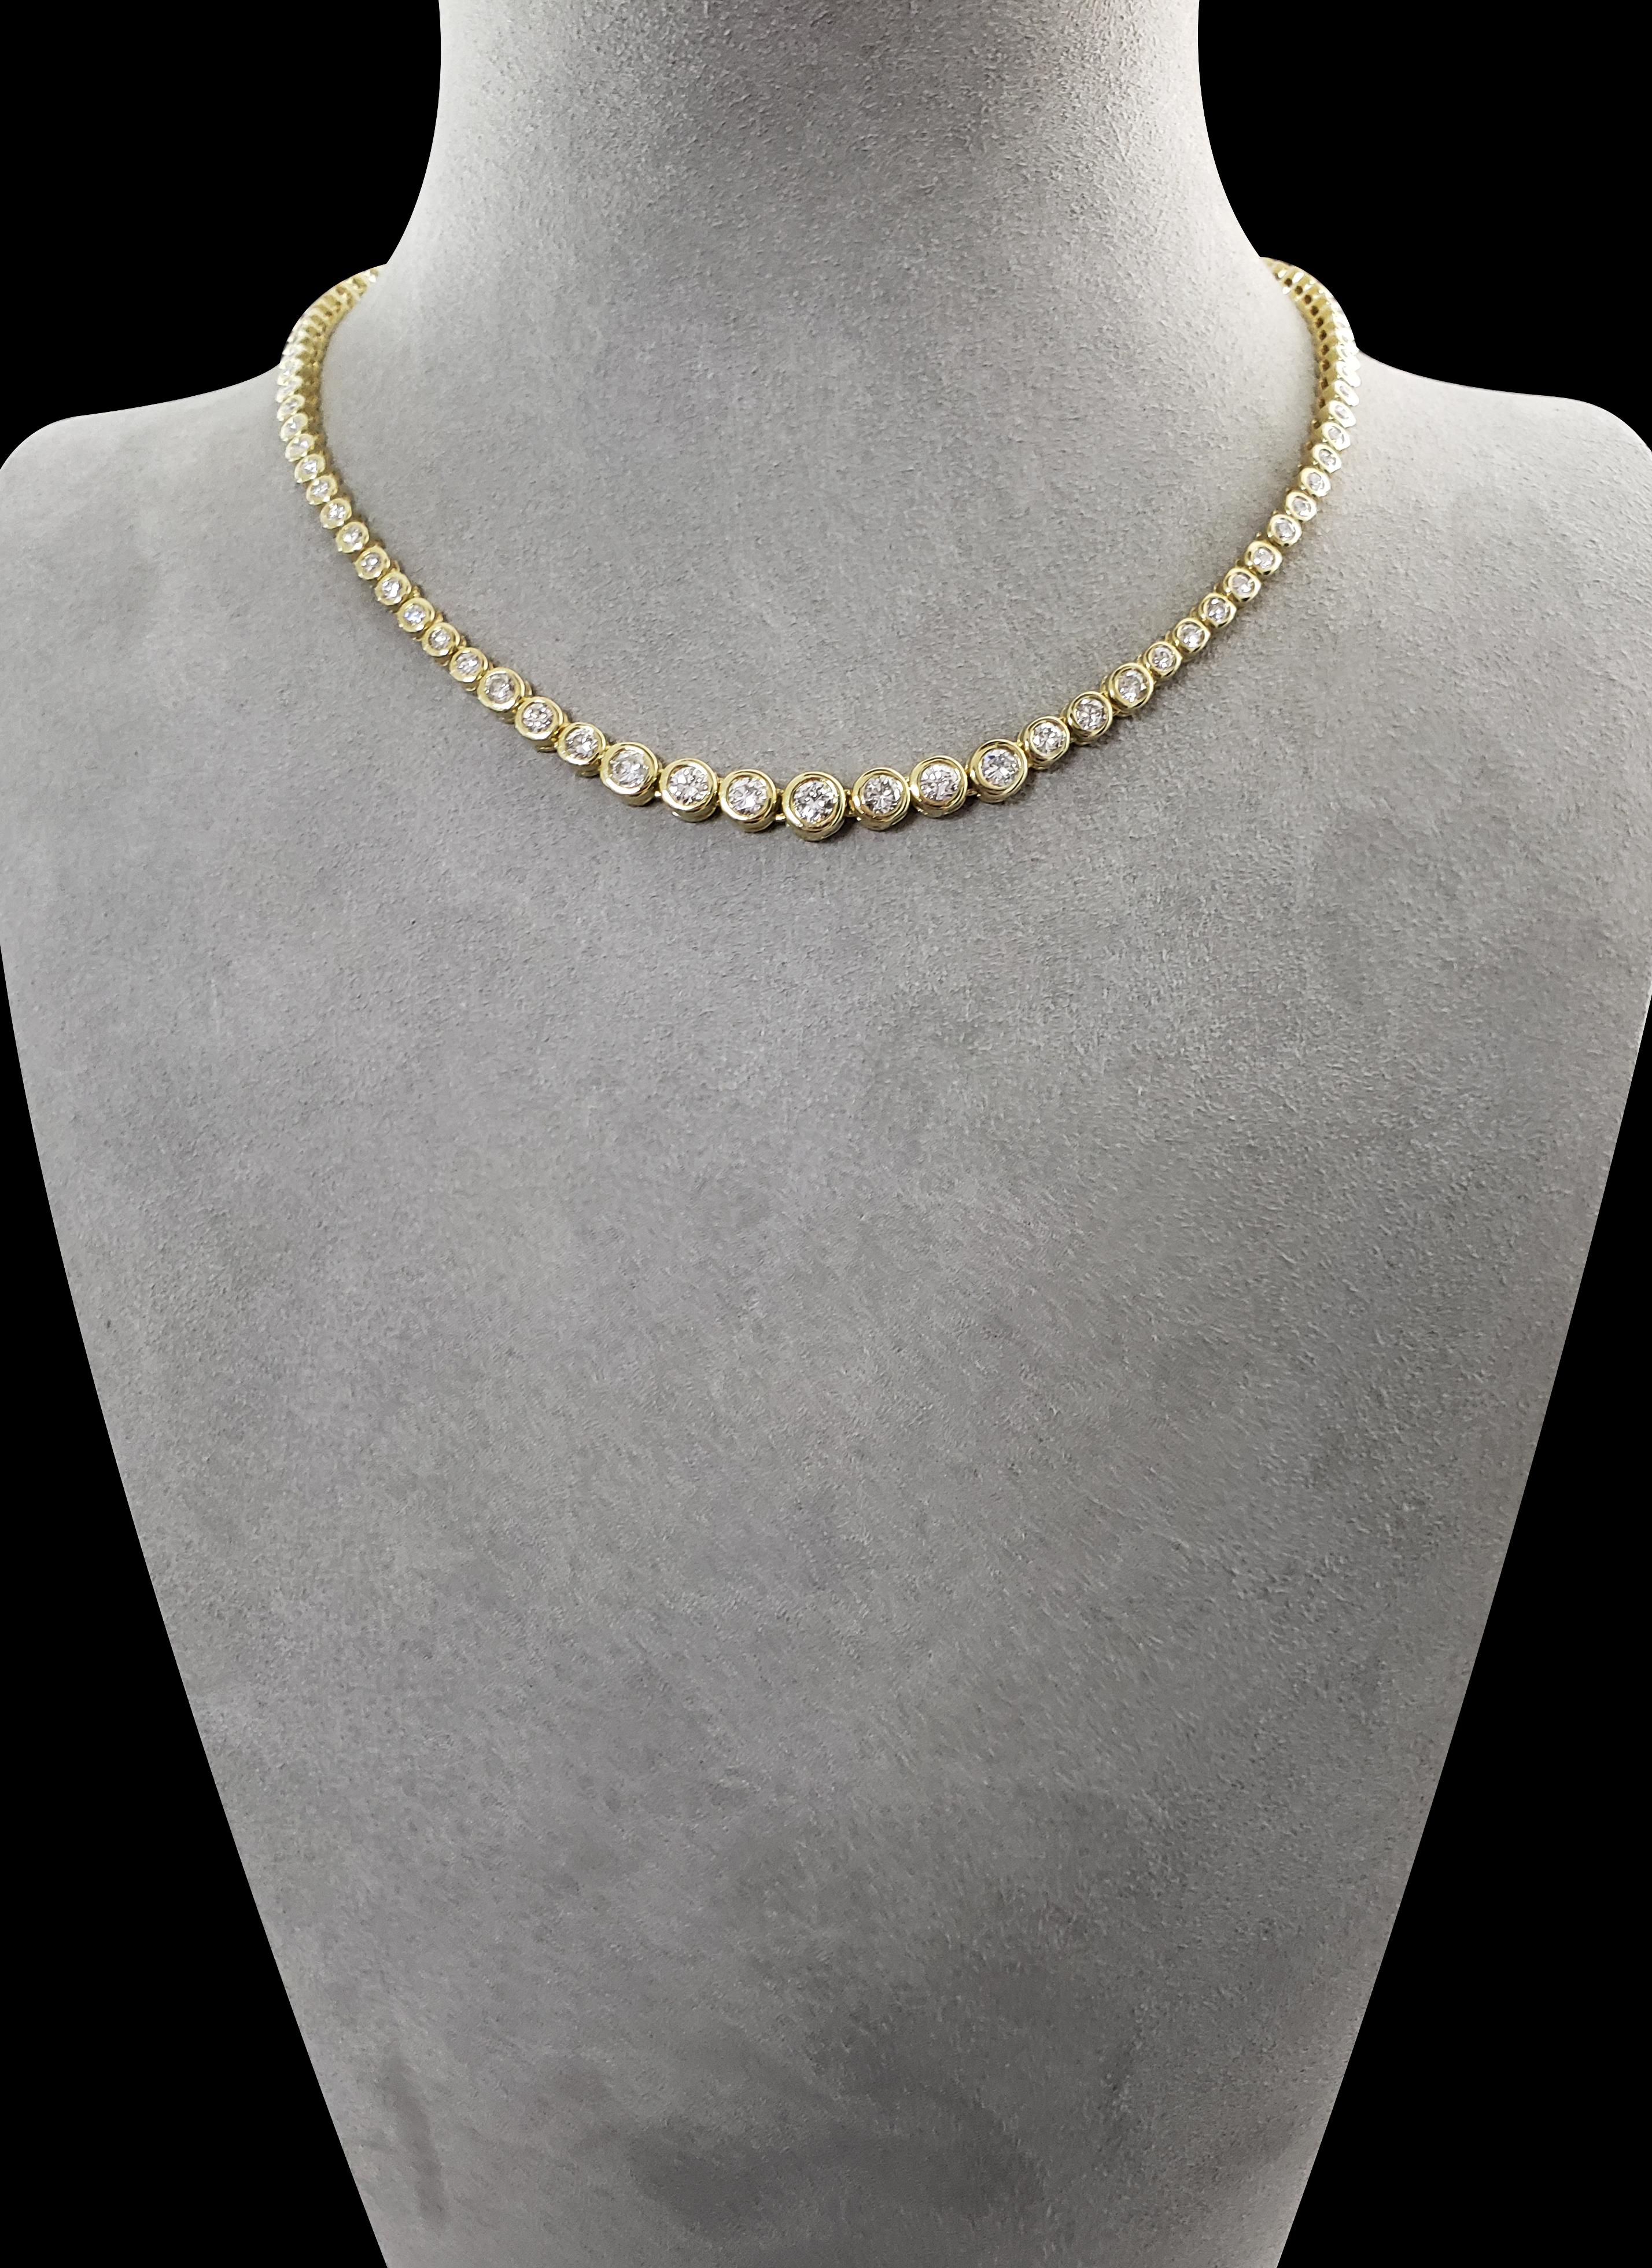 A versatile necklace for casual, everyday wear or to compliment a formal style. Showcases brilliant round diamonds set in a 14 karat yellow gold bezel. Each diamond graduates larger as it drops to center. Diamonds weigh 6.17 carats total. 16 inches